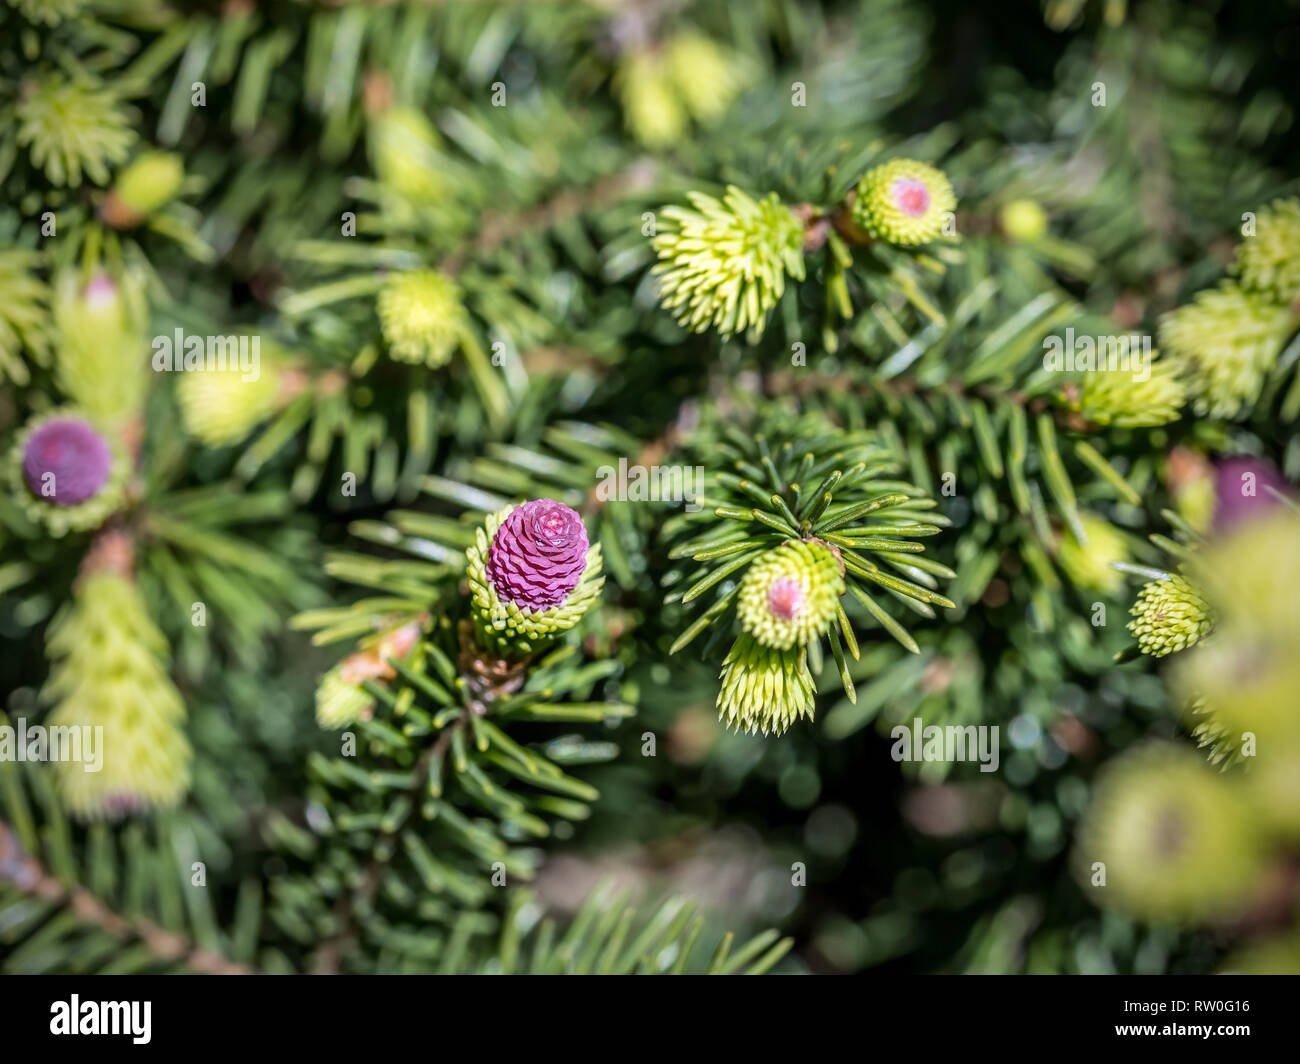 Closeup of Picea Abies spruce tree with cones Stock Photo